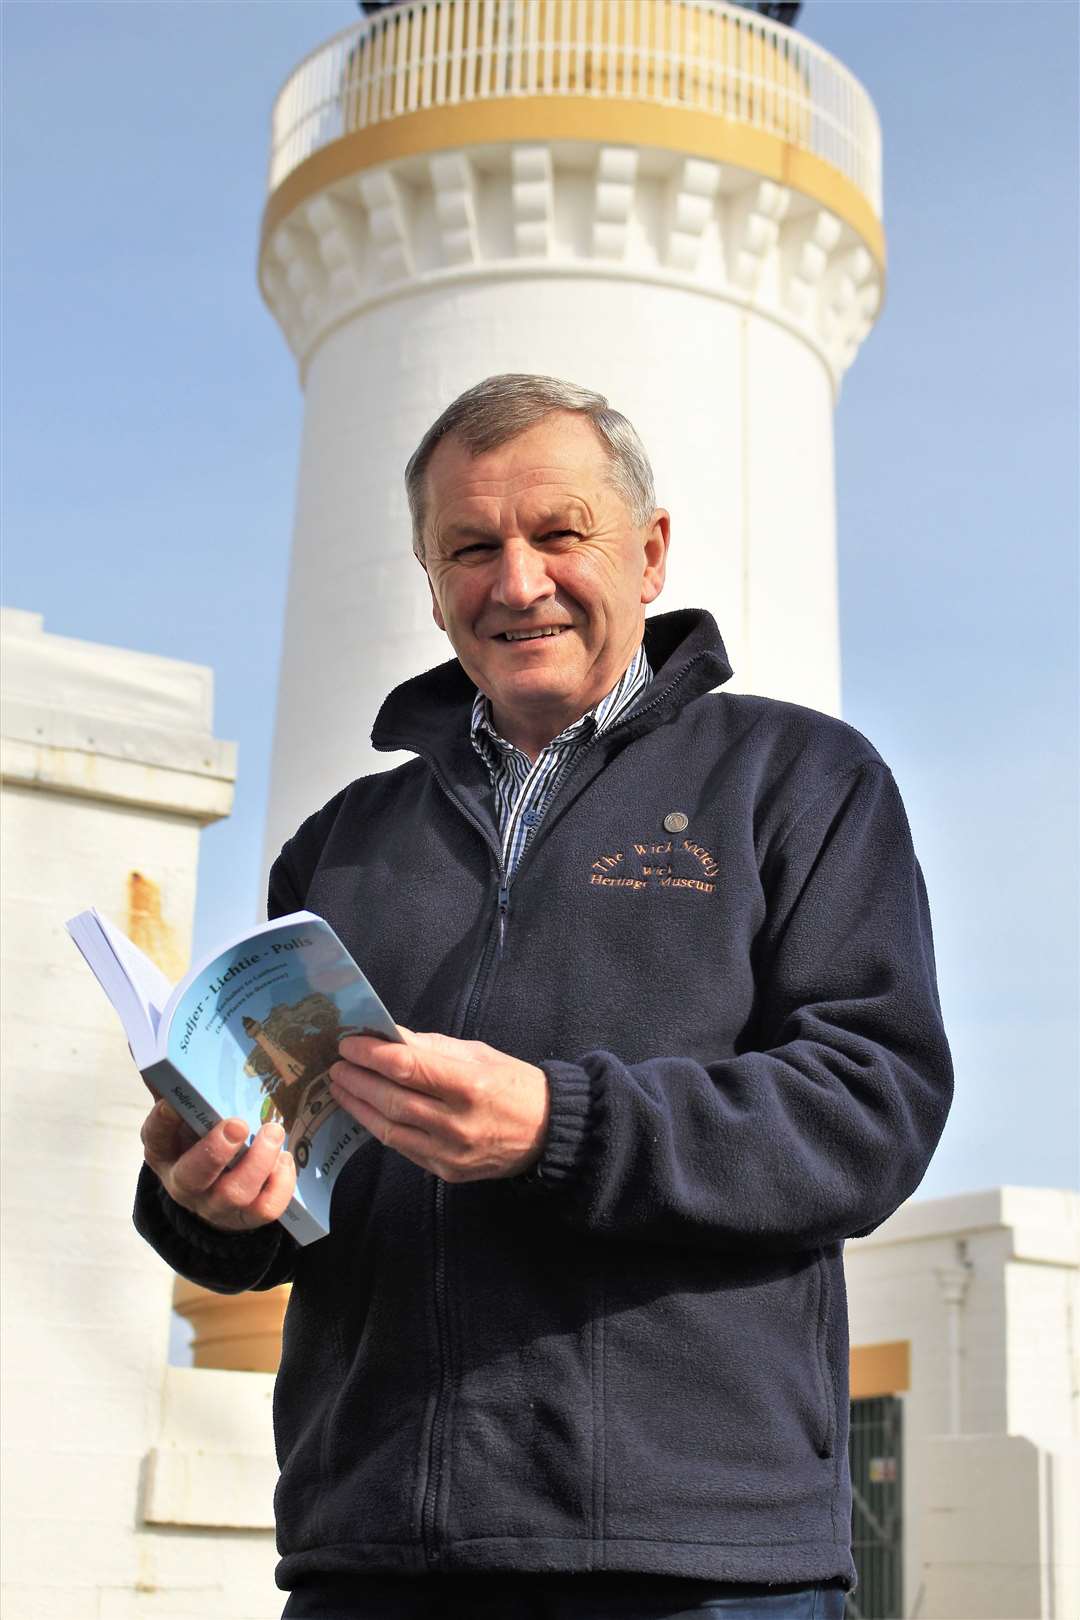 David Fraser with his book at Noss Head lighthouse.